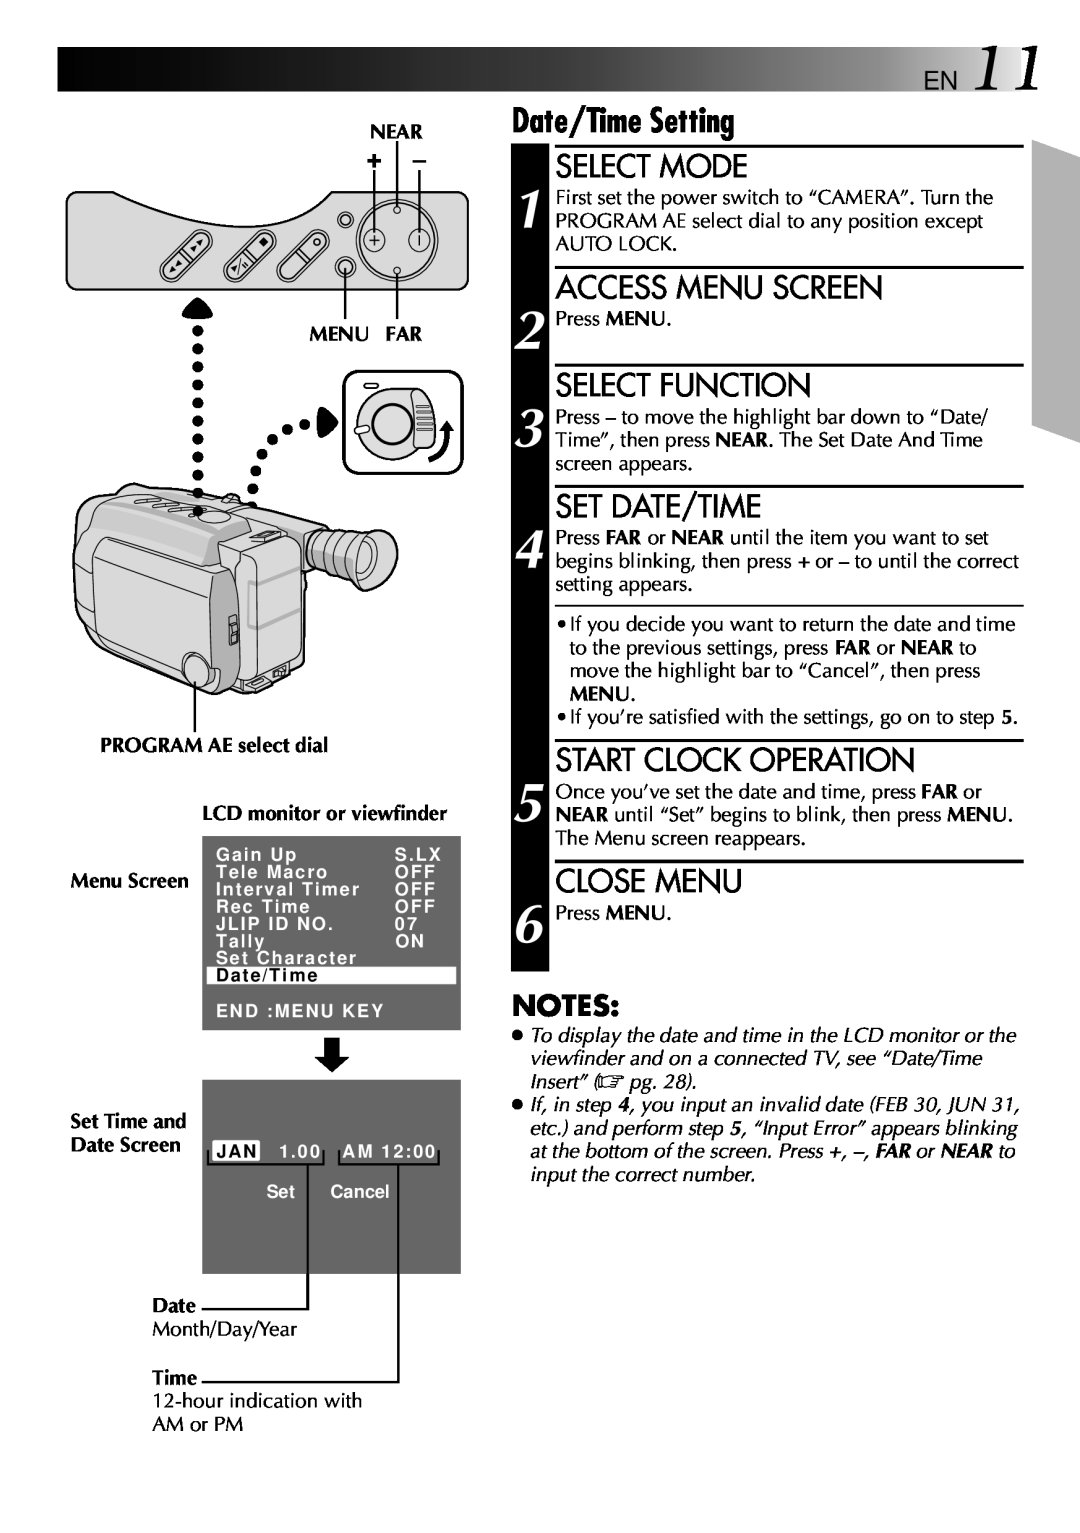 JVC GR-AXM70 manual Start Clock Operation, Close Menu, Date Screen, To display the date and time in the LCD monitor or the 